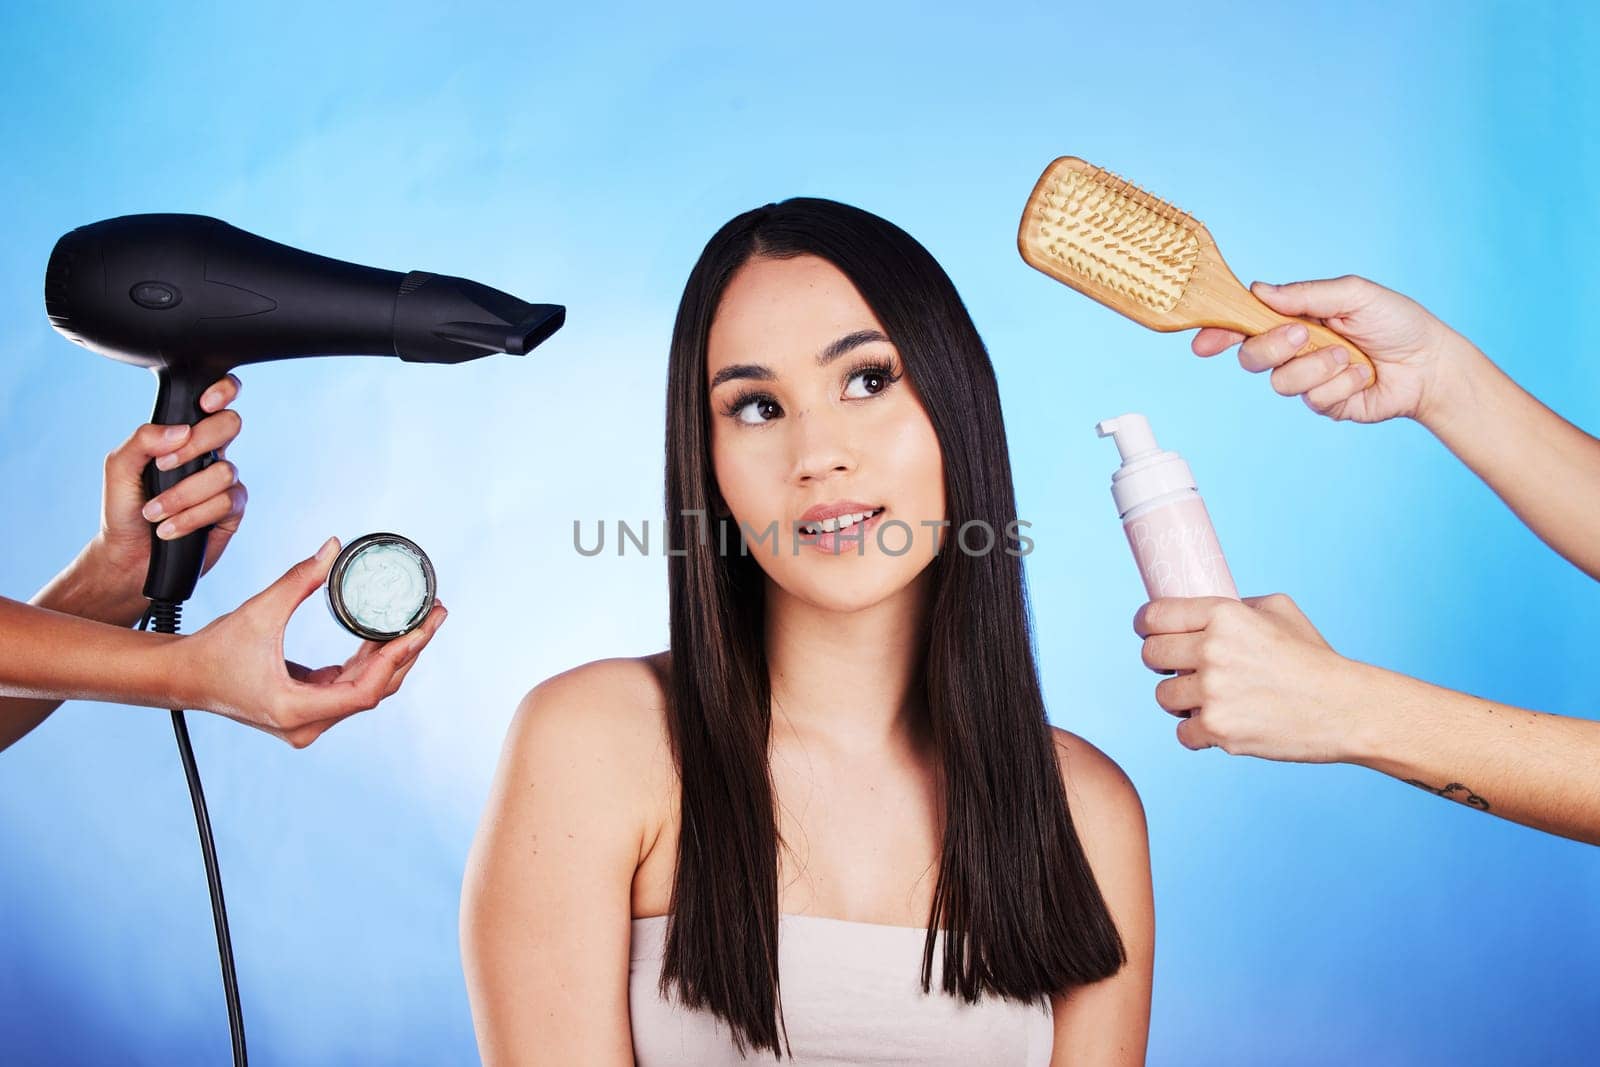 Hair care, beauty and tools with a woman in studio with a hairdryer, self care product and brush. Salon, hairdresser and a female model person thinking of shampoo and cosmetics on a blue background.